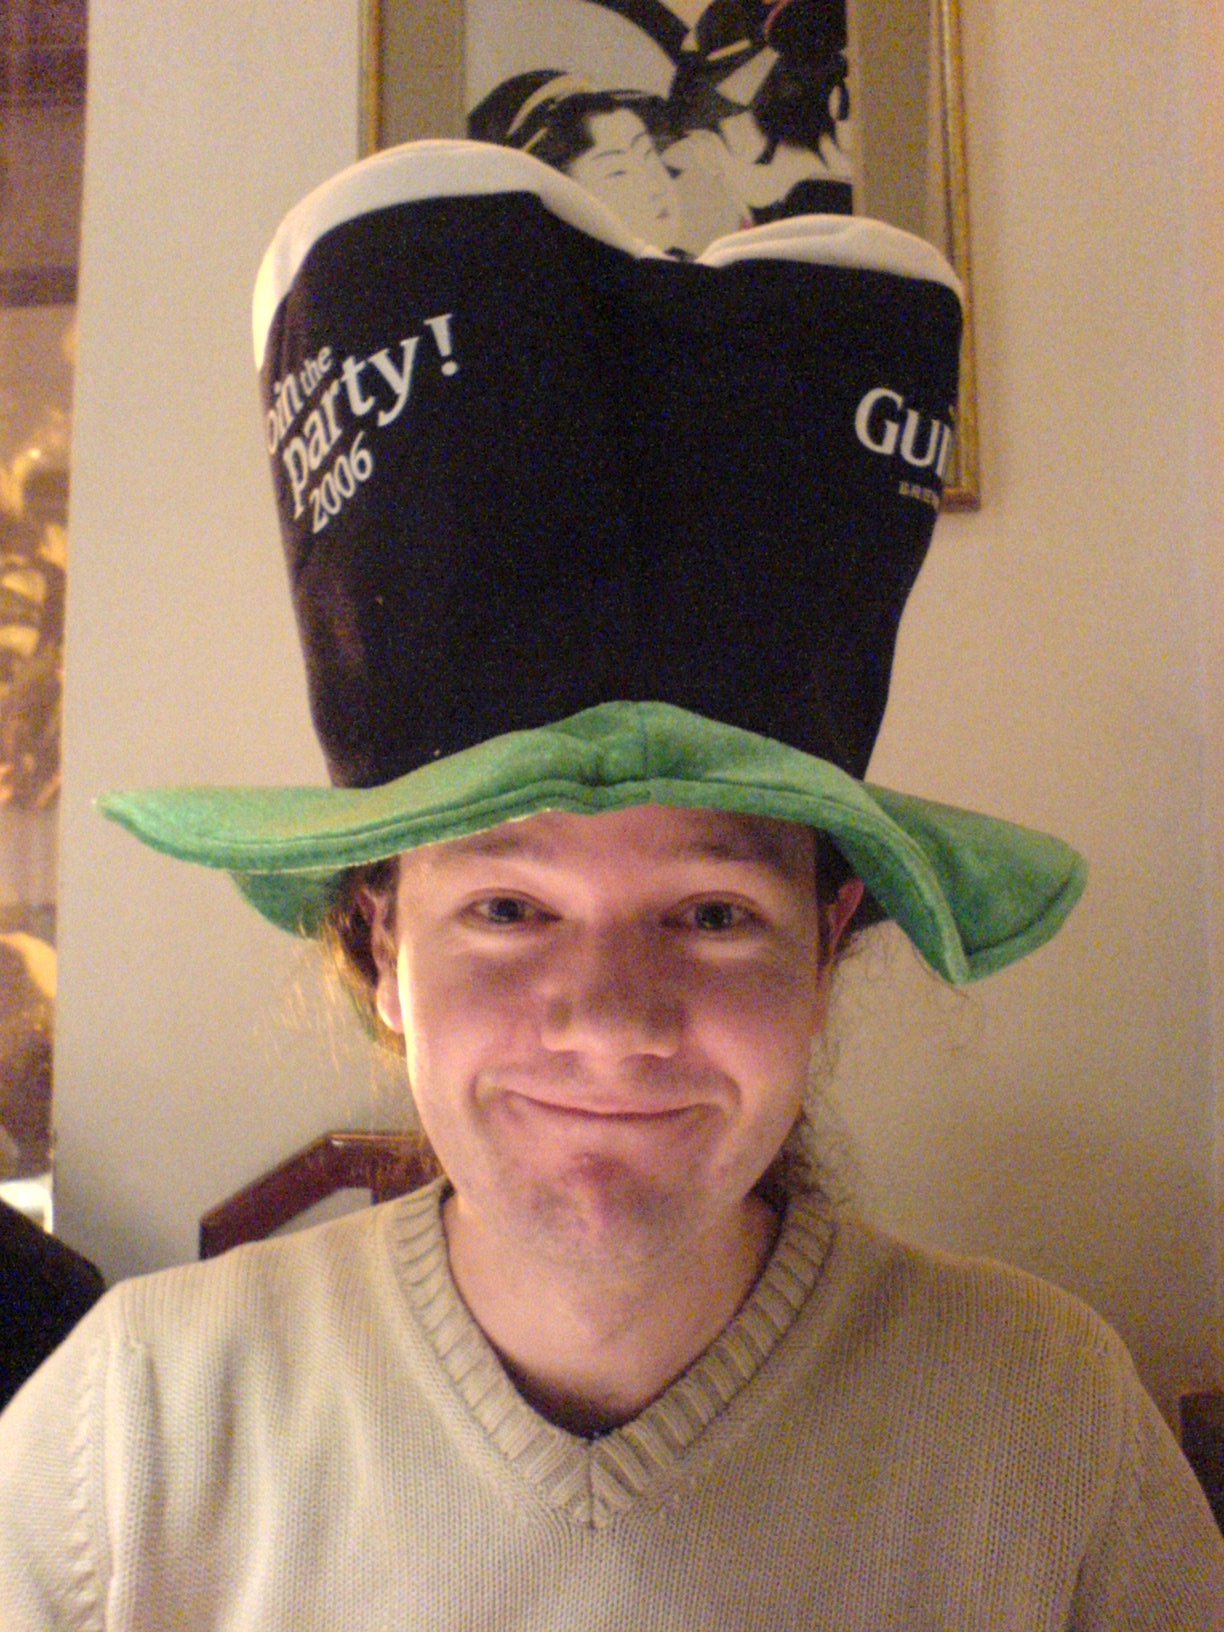 Karl with a Guinness hat